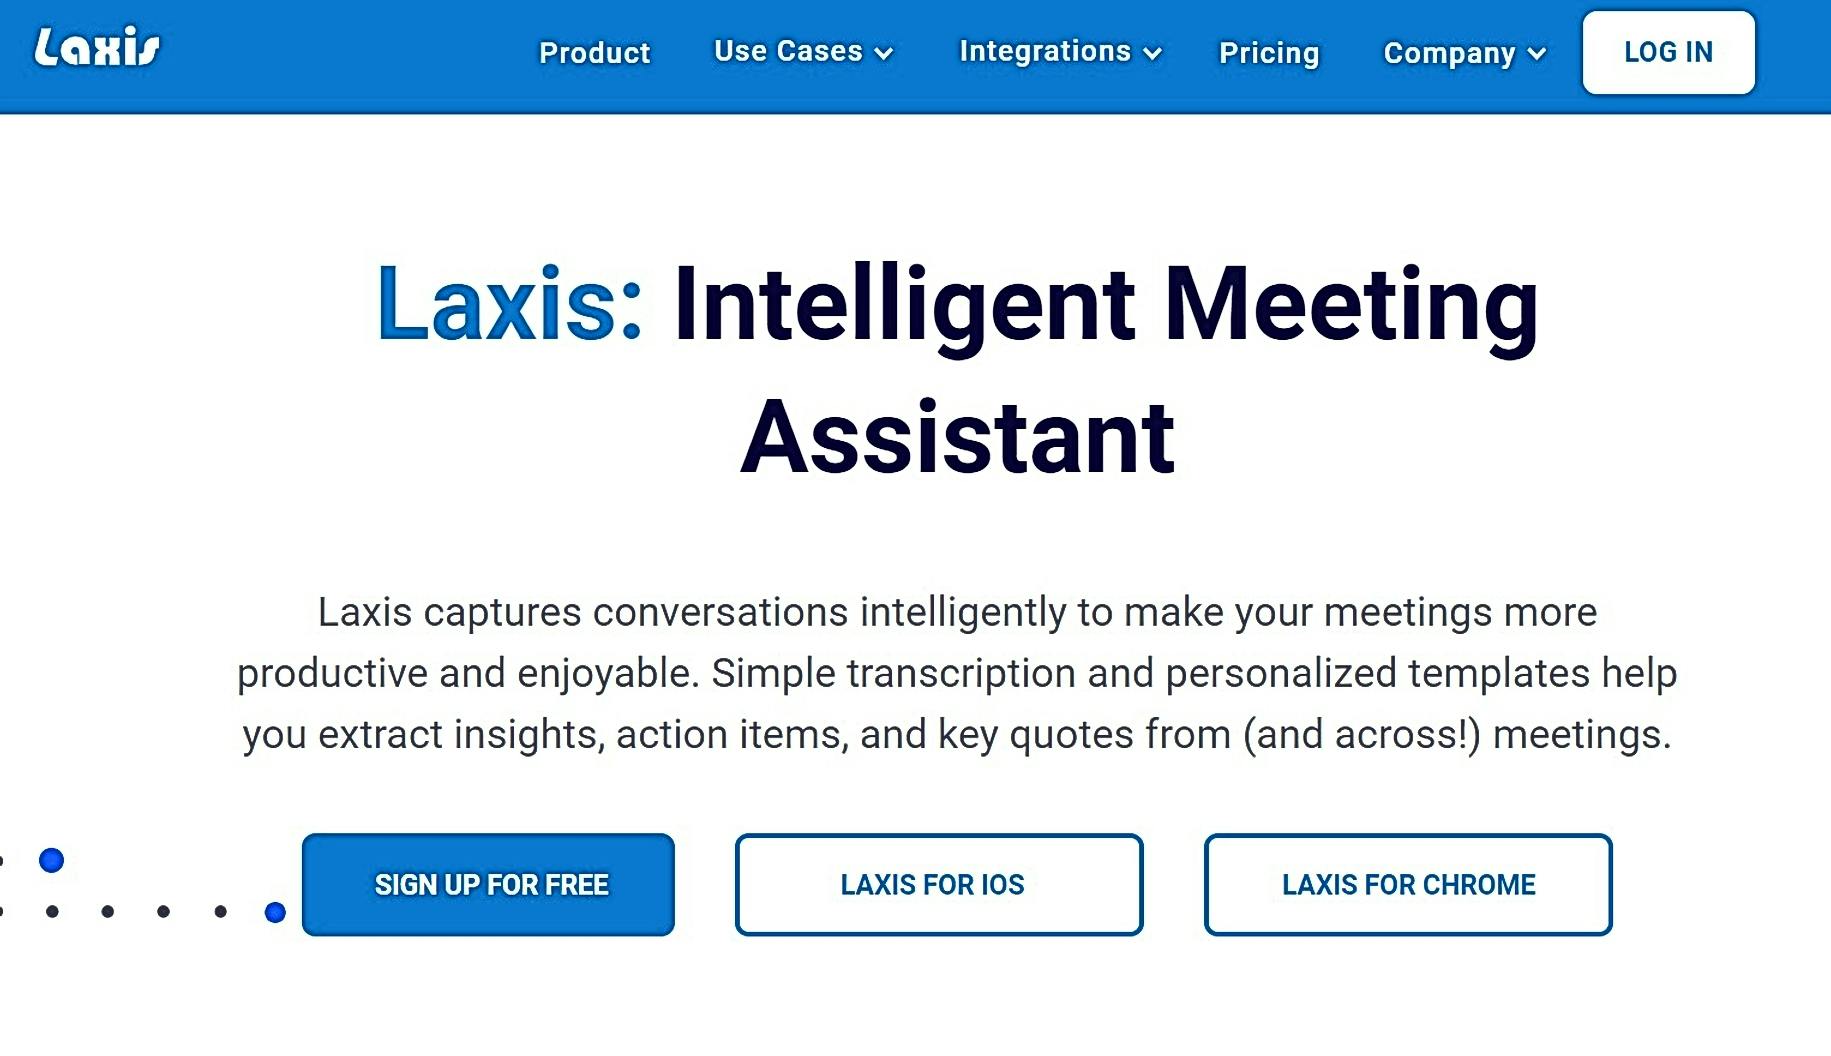 Laxis featured